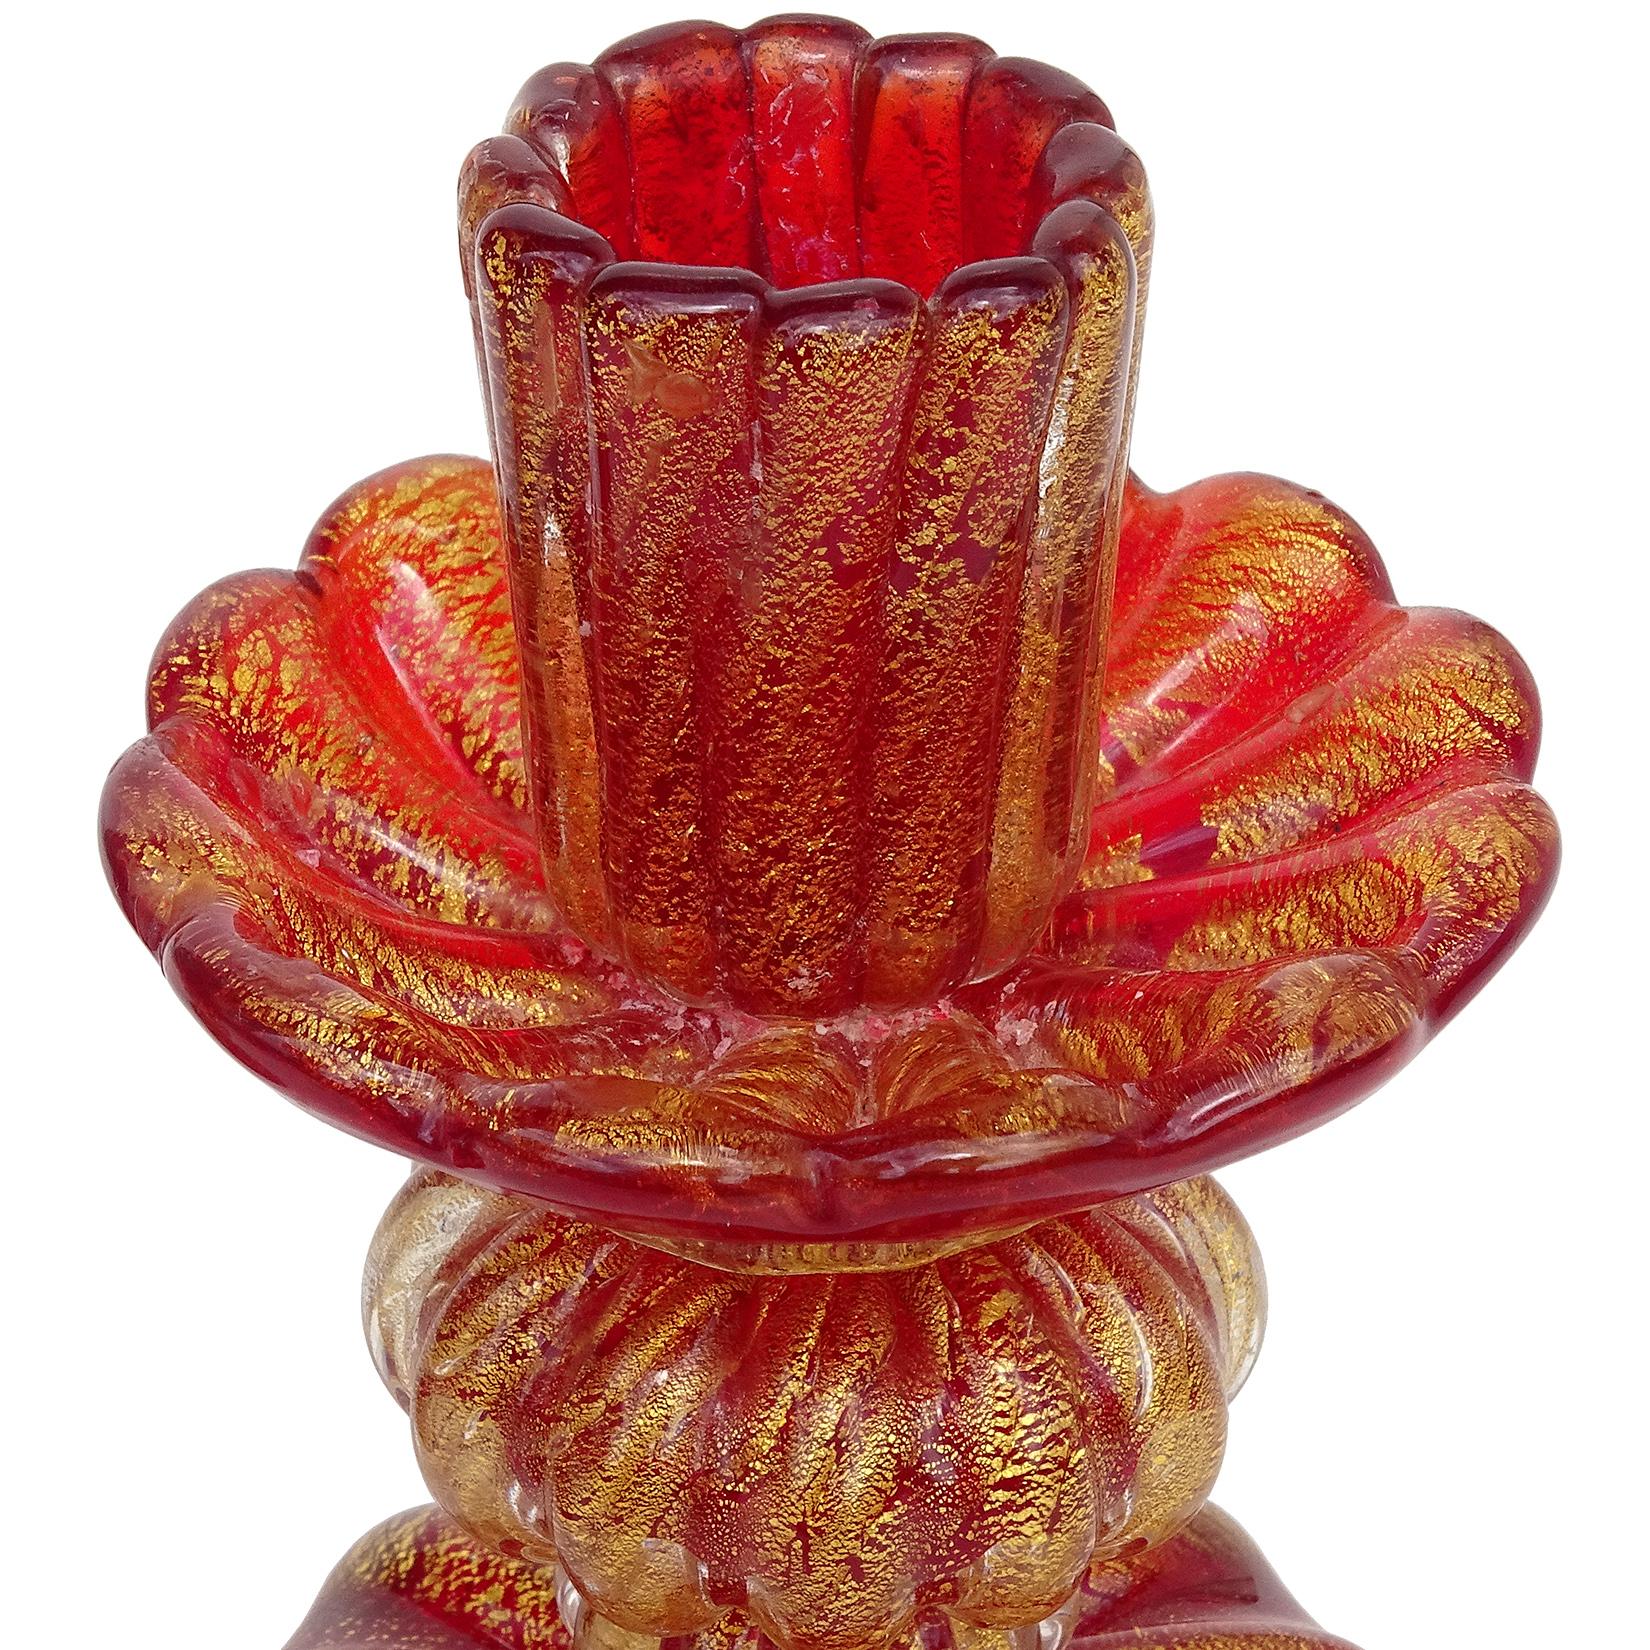 Hand-Crafted Barovier Toso Murano Red Gold Flecks Italian Art Glass Ribbed Candlestick Pair